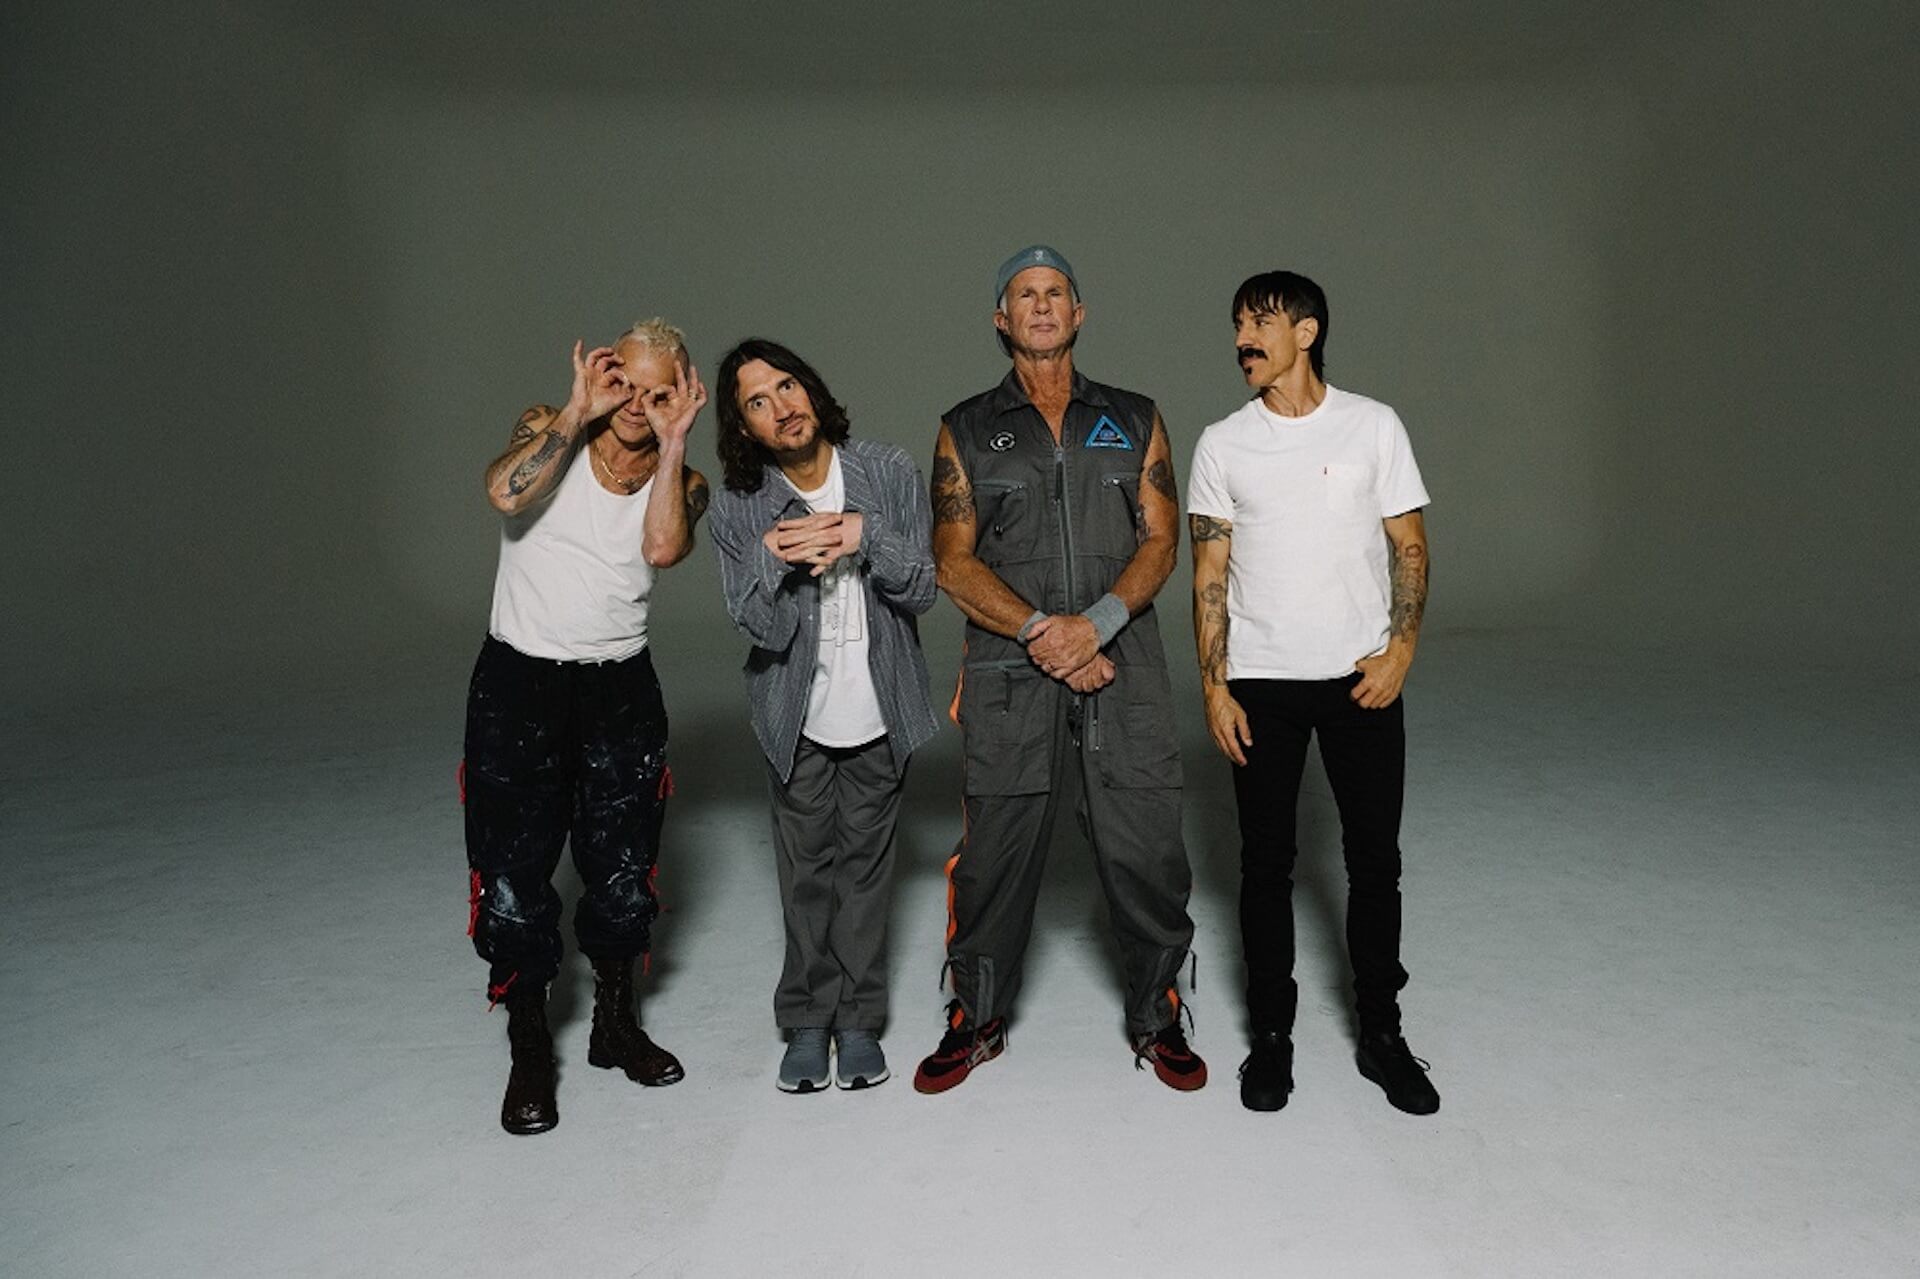 Red Hot Chili Peppers、最新作『Unlimited Love』より先行曲“Poster Child”が配信＆MV公開 music_220303_redhotchillpeppers_02